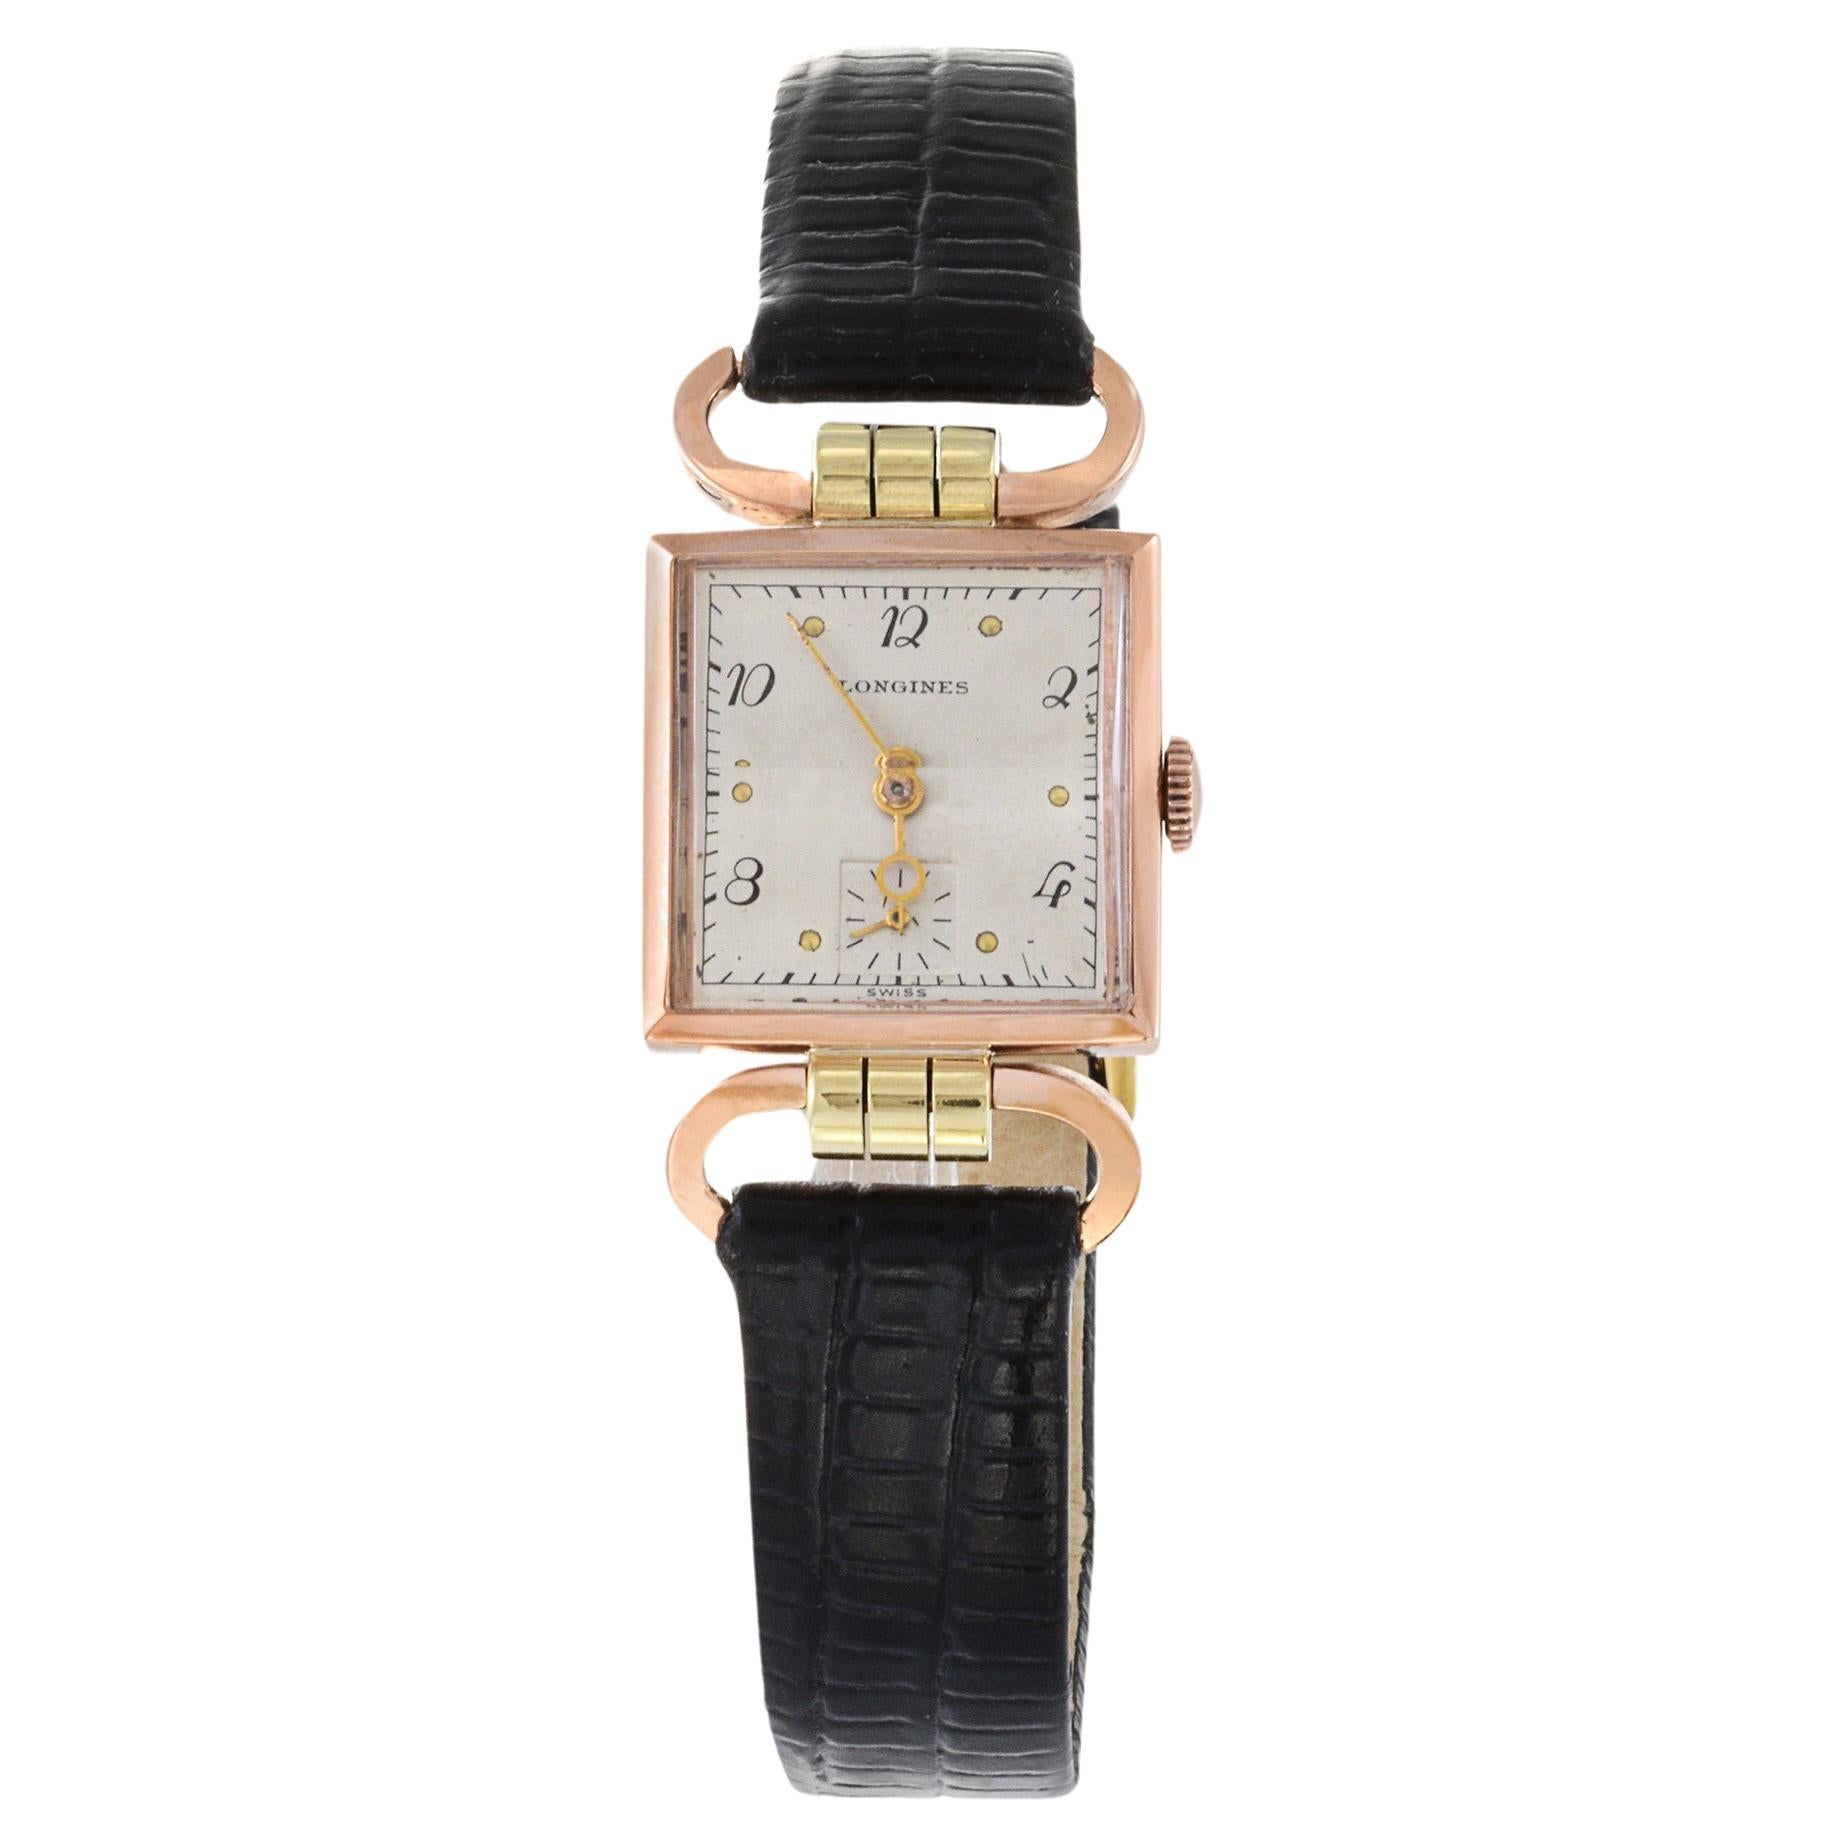 Longines Tank Watch 14K Rose and Green Gold